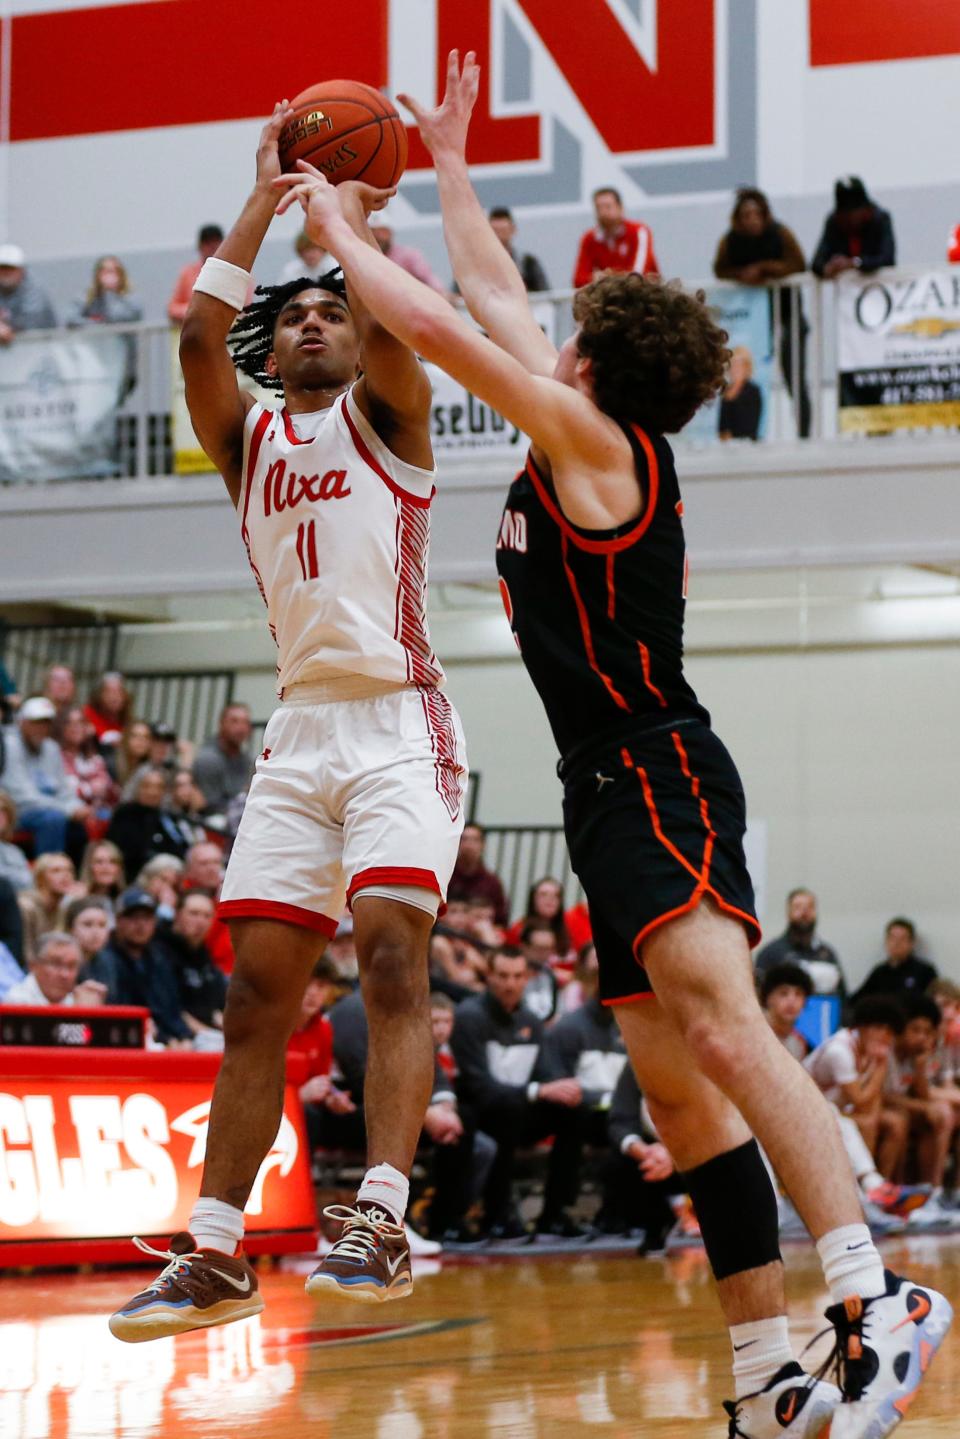 Nixa's Kael Combs shoots a field goal as the Eagles take on the Republic Tigers during a game on Tuesday, Feb. 7, 2023.